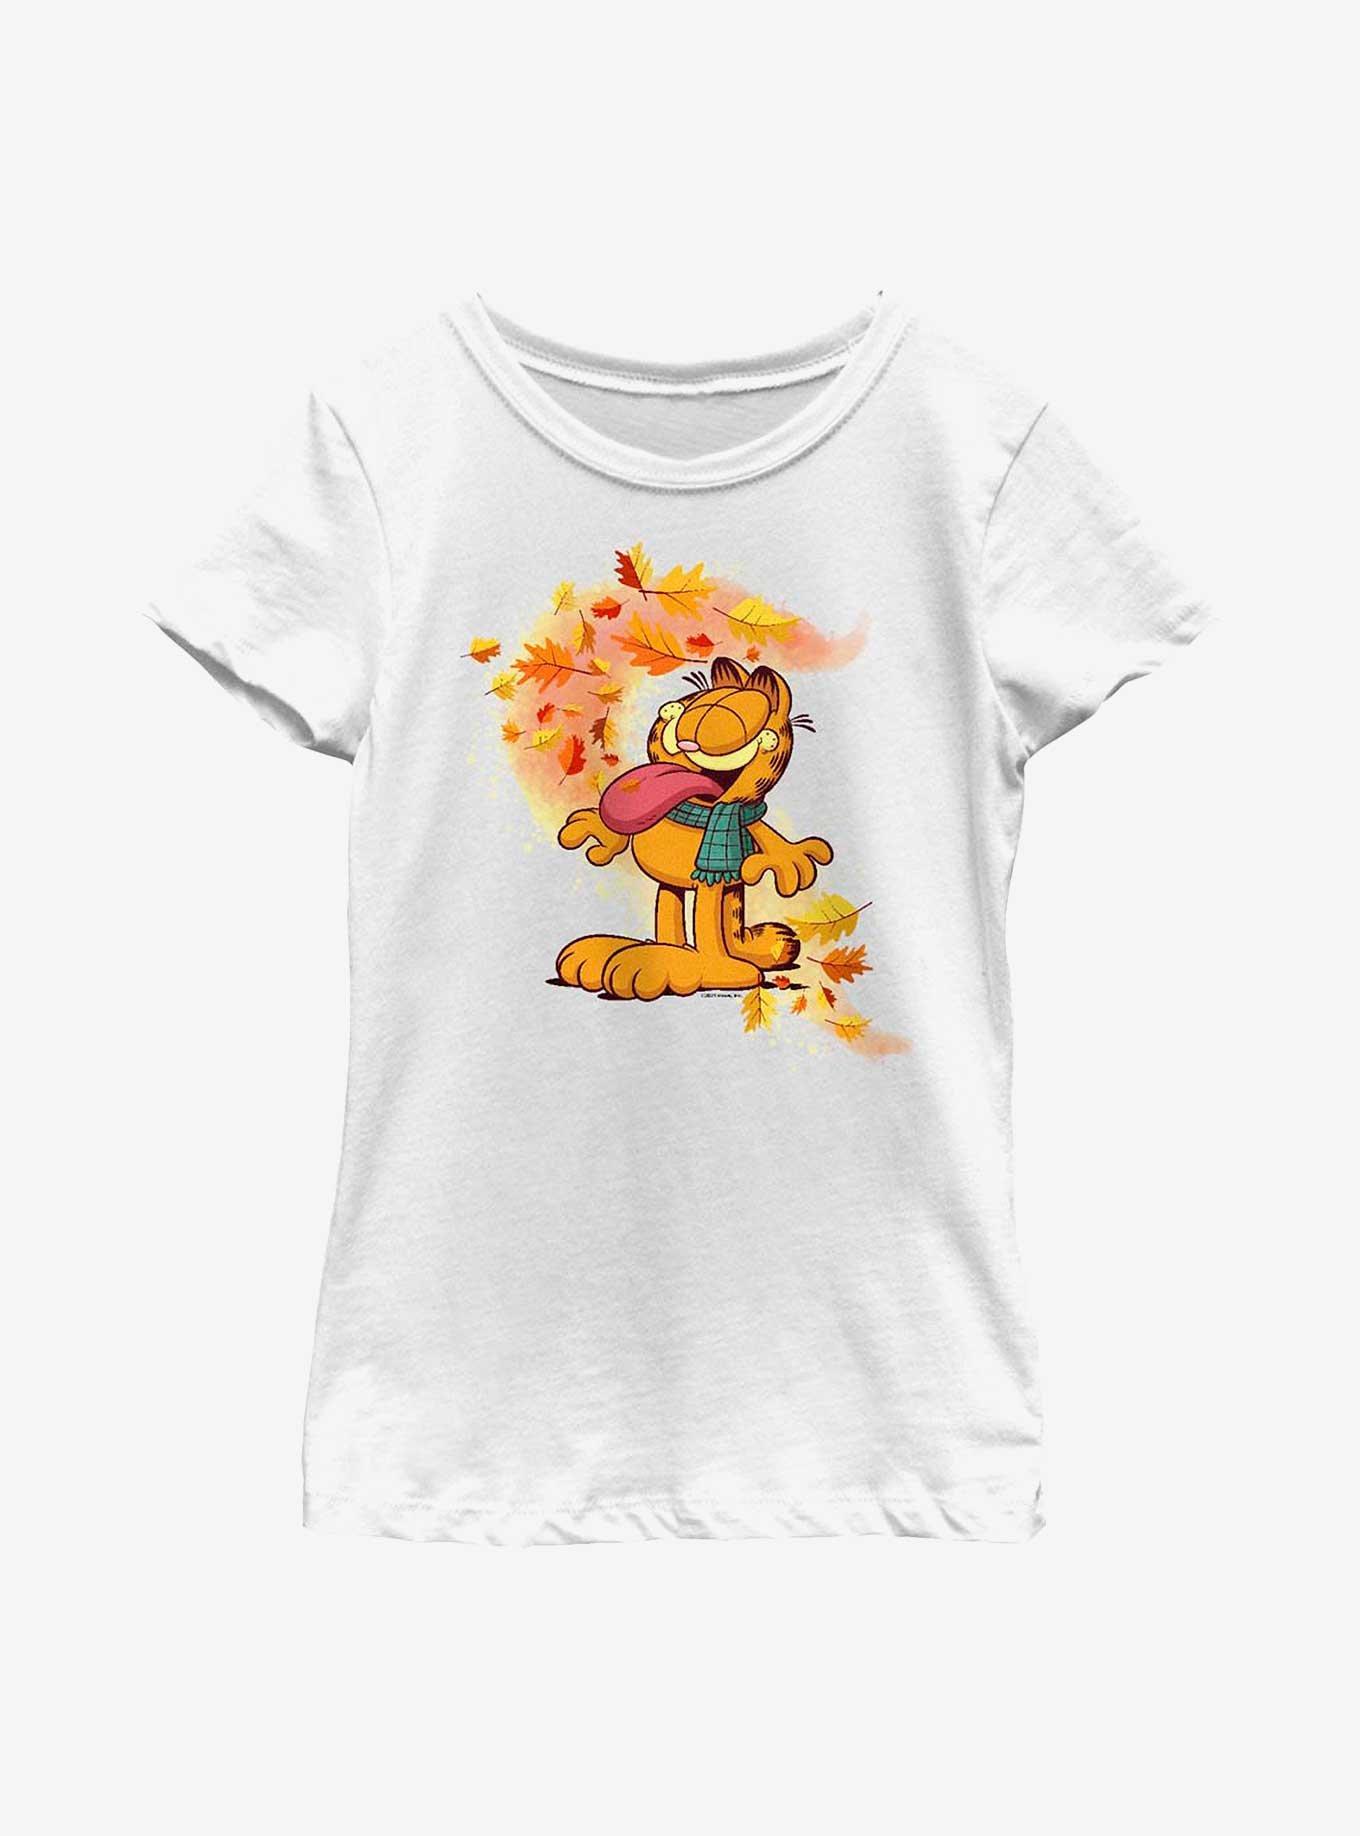 Garfield Autum Leaves Youth Girl's T-Shirt, WHITE, hi-res